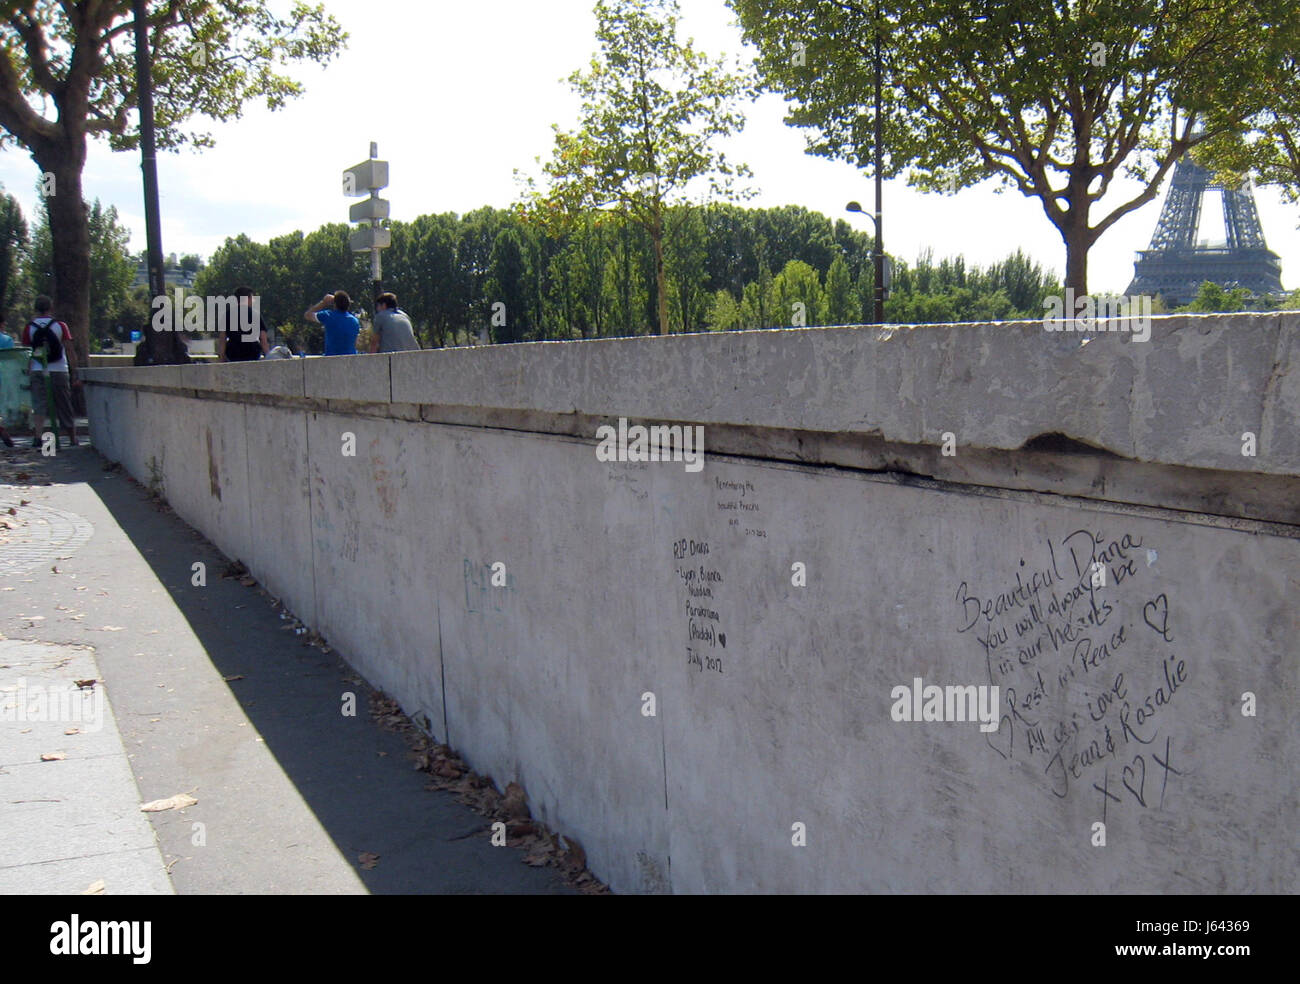 Messages of grief are written on a wall at the Pont de l'Alma tunnel, where Princess Diana died in a car accident on 31 August 1997, in Paris, France, 23 August 2012. The replica of the flame of the Statue of Liberty will be used as the location for the commemration of Diana. Photo: Benjamin Wehrmann | usage worldwide Stock Photo